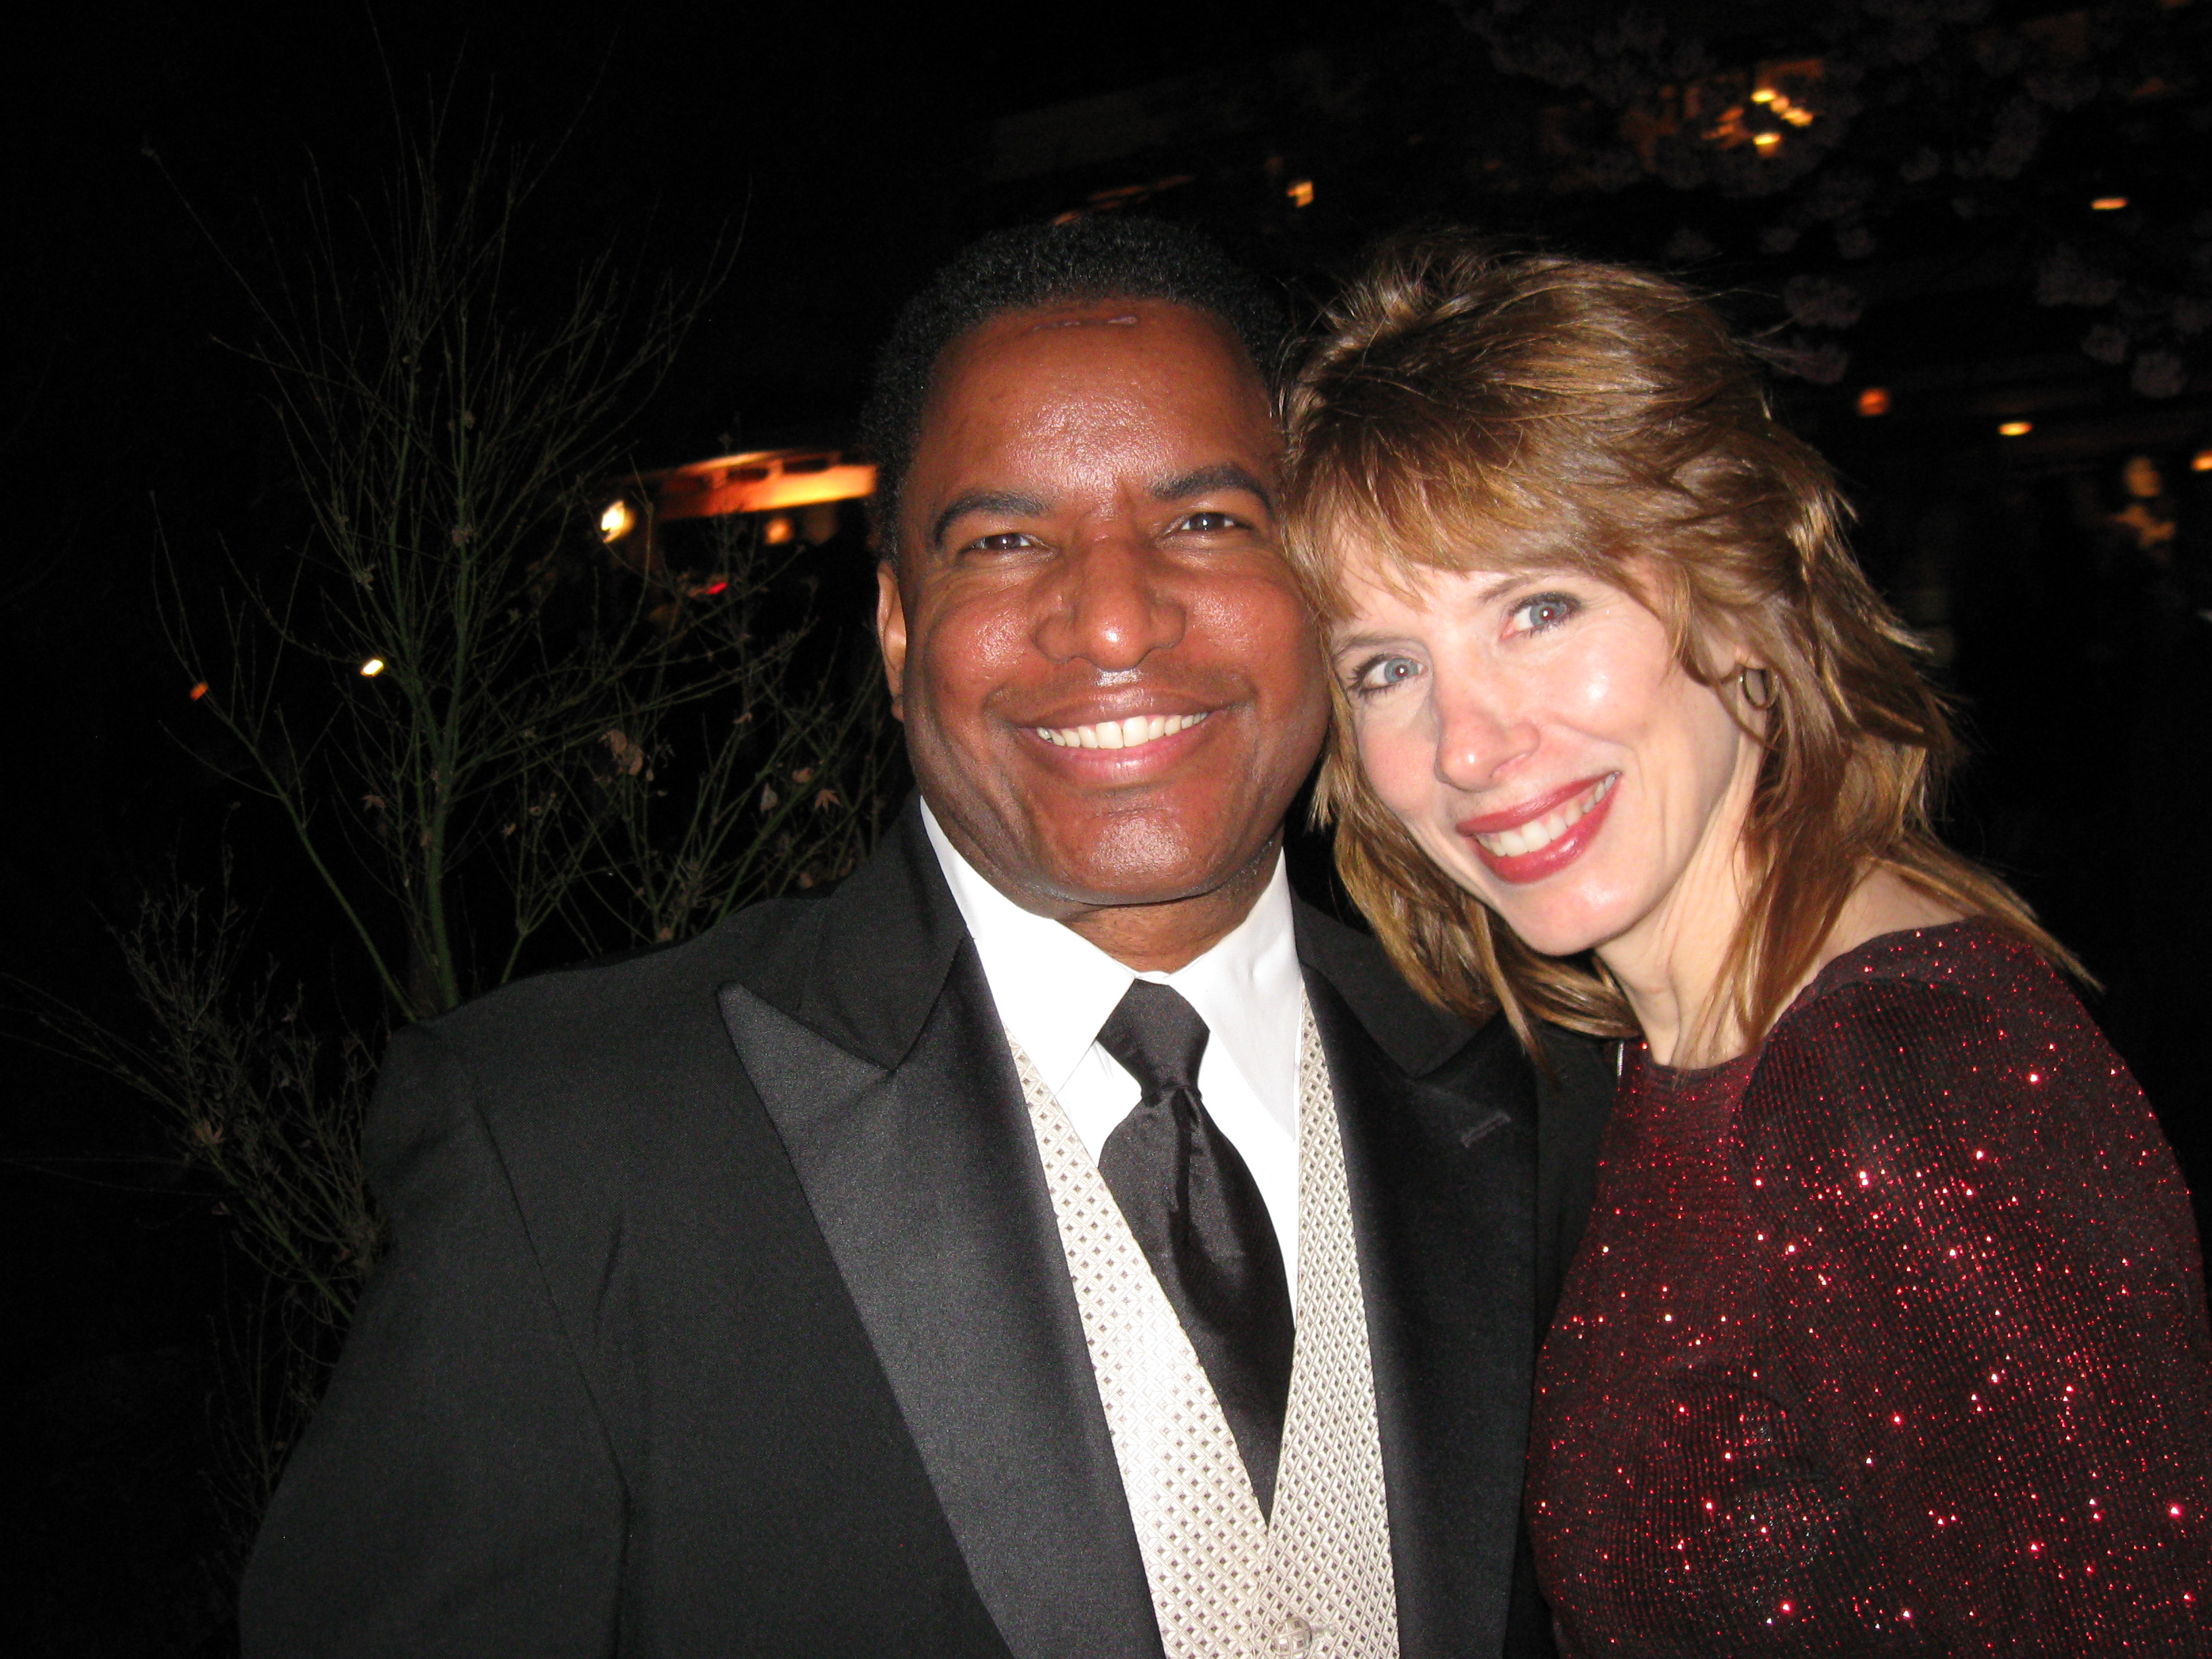 Kirby Britten with Toni Deaver at the pre-Oscar Bash in Beverly Hills, CA.